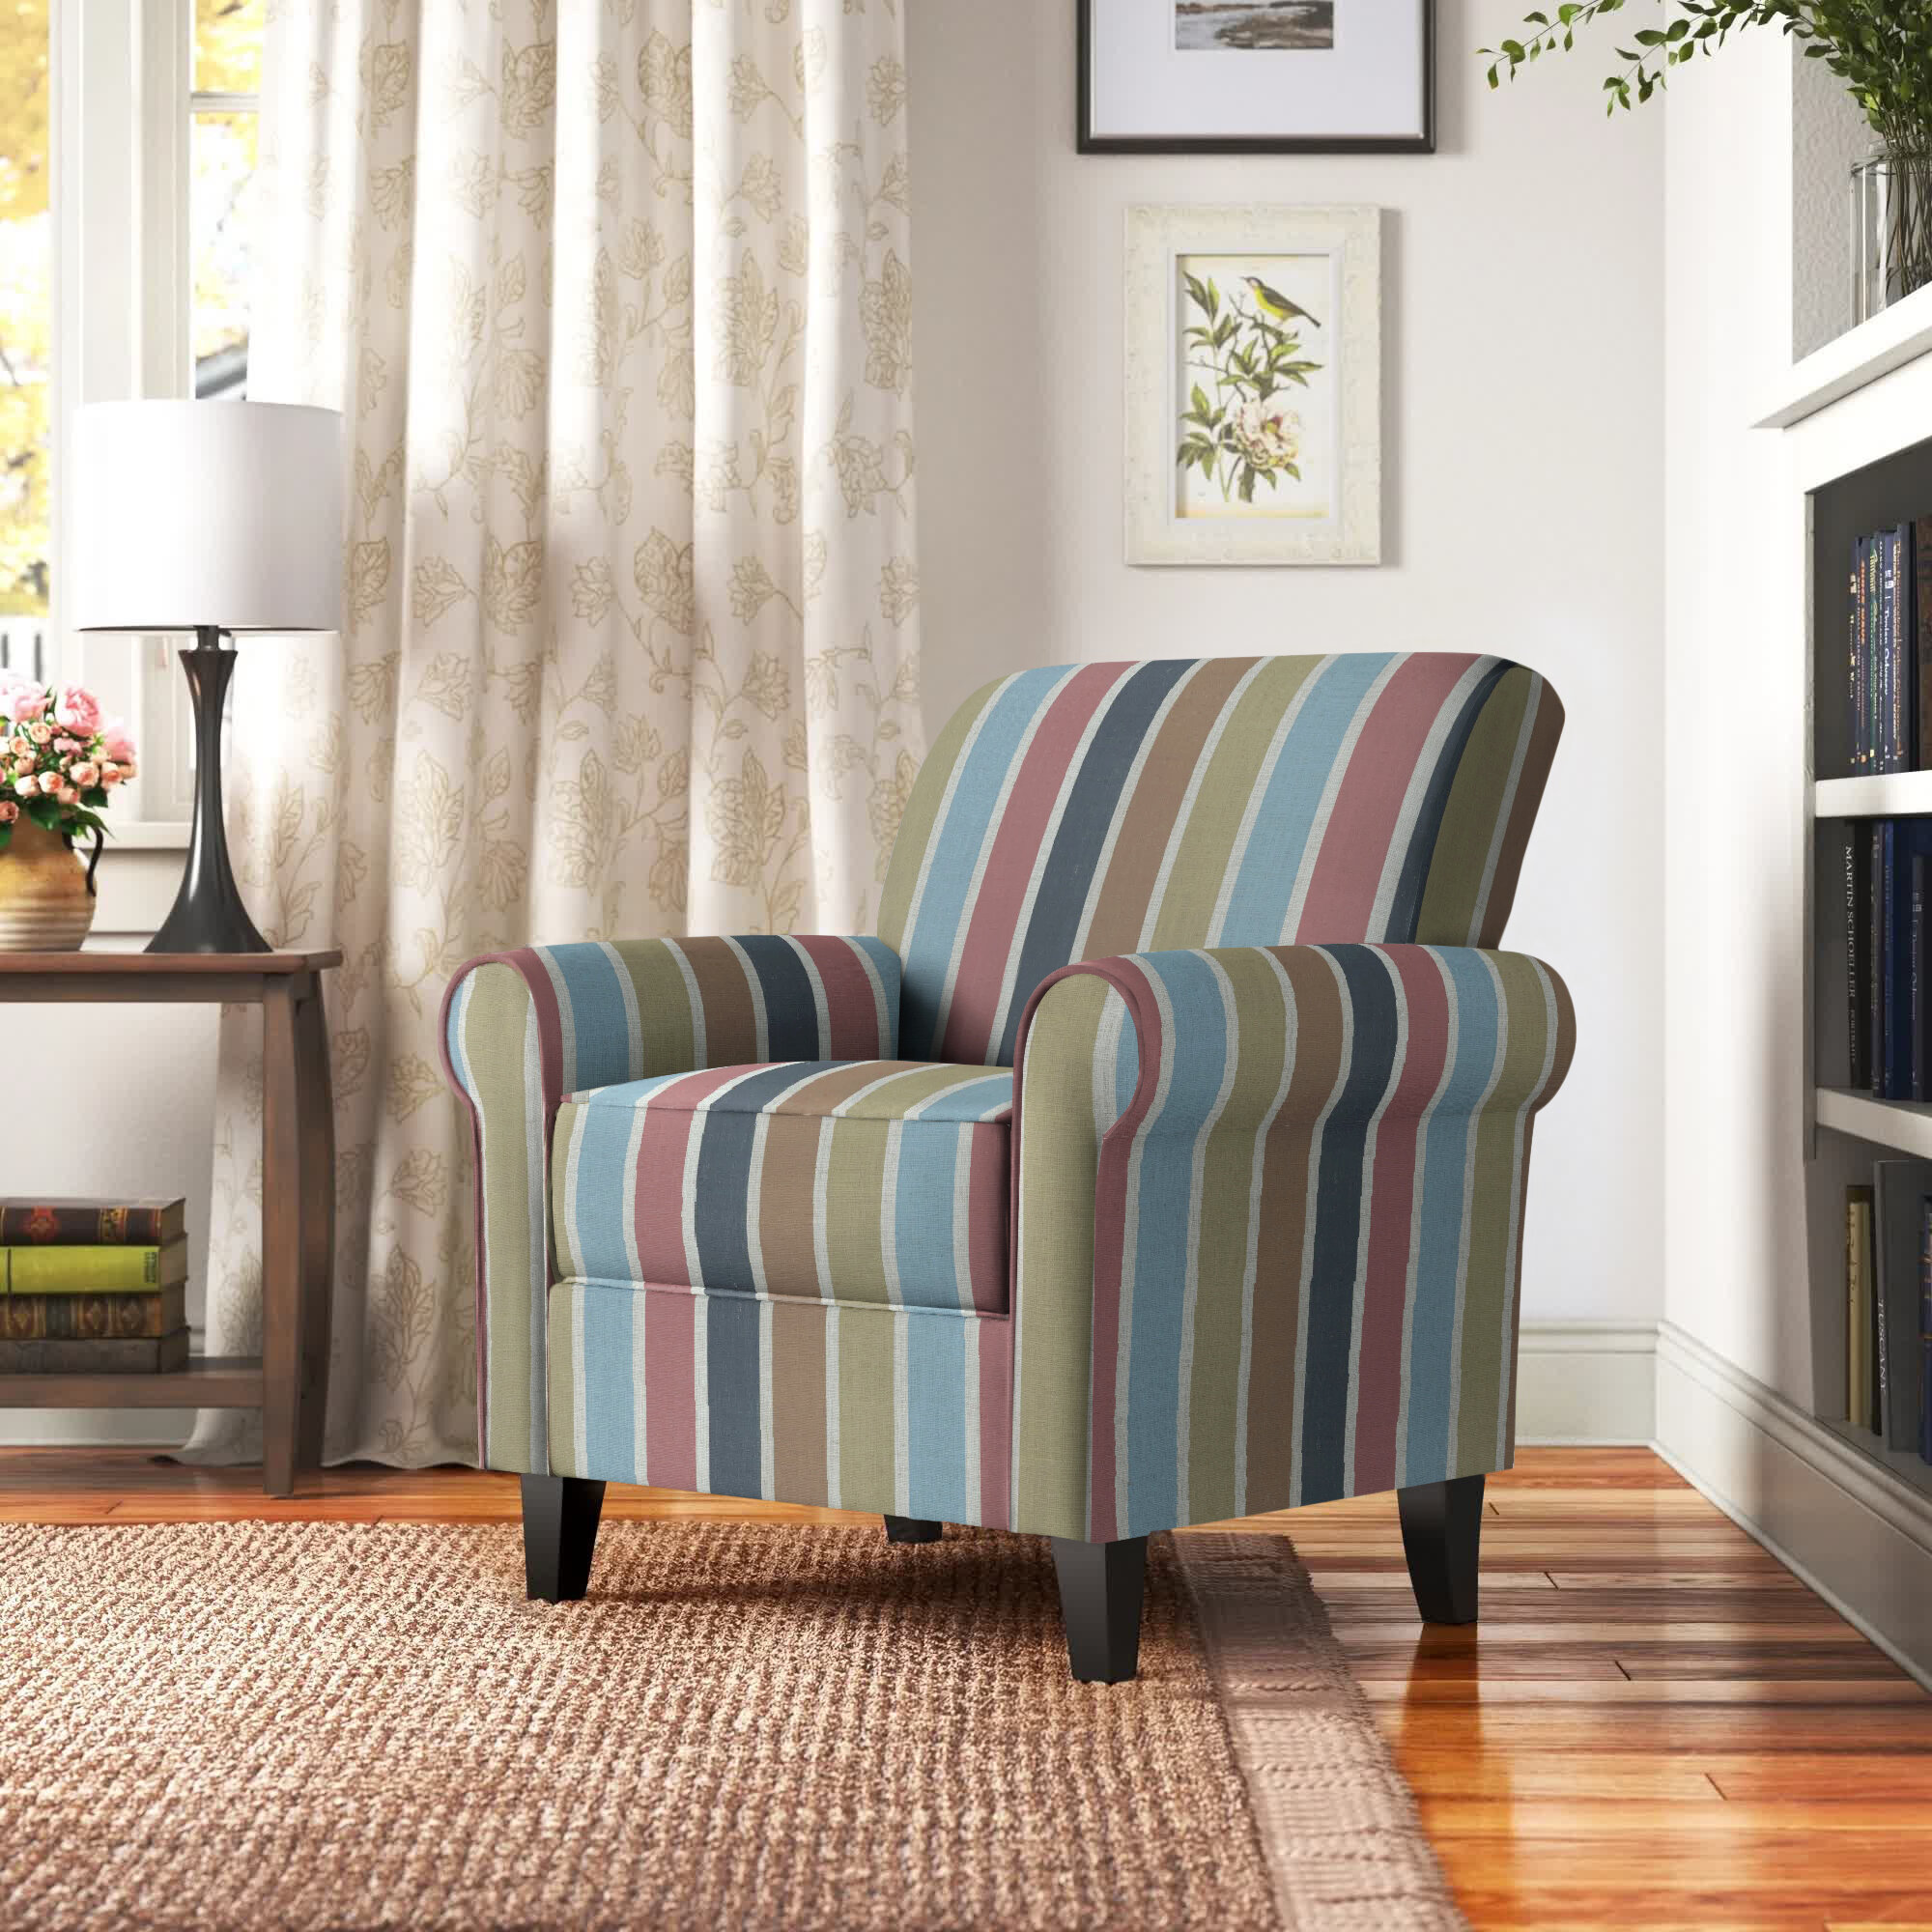 Wayfair | Blue Striped Accent Chairs You'll Love in 2022